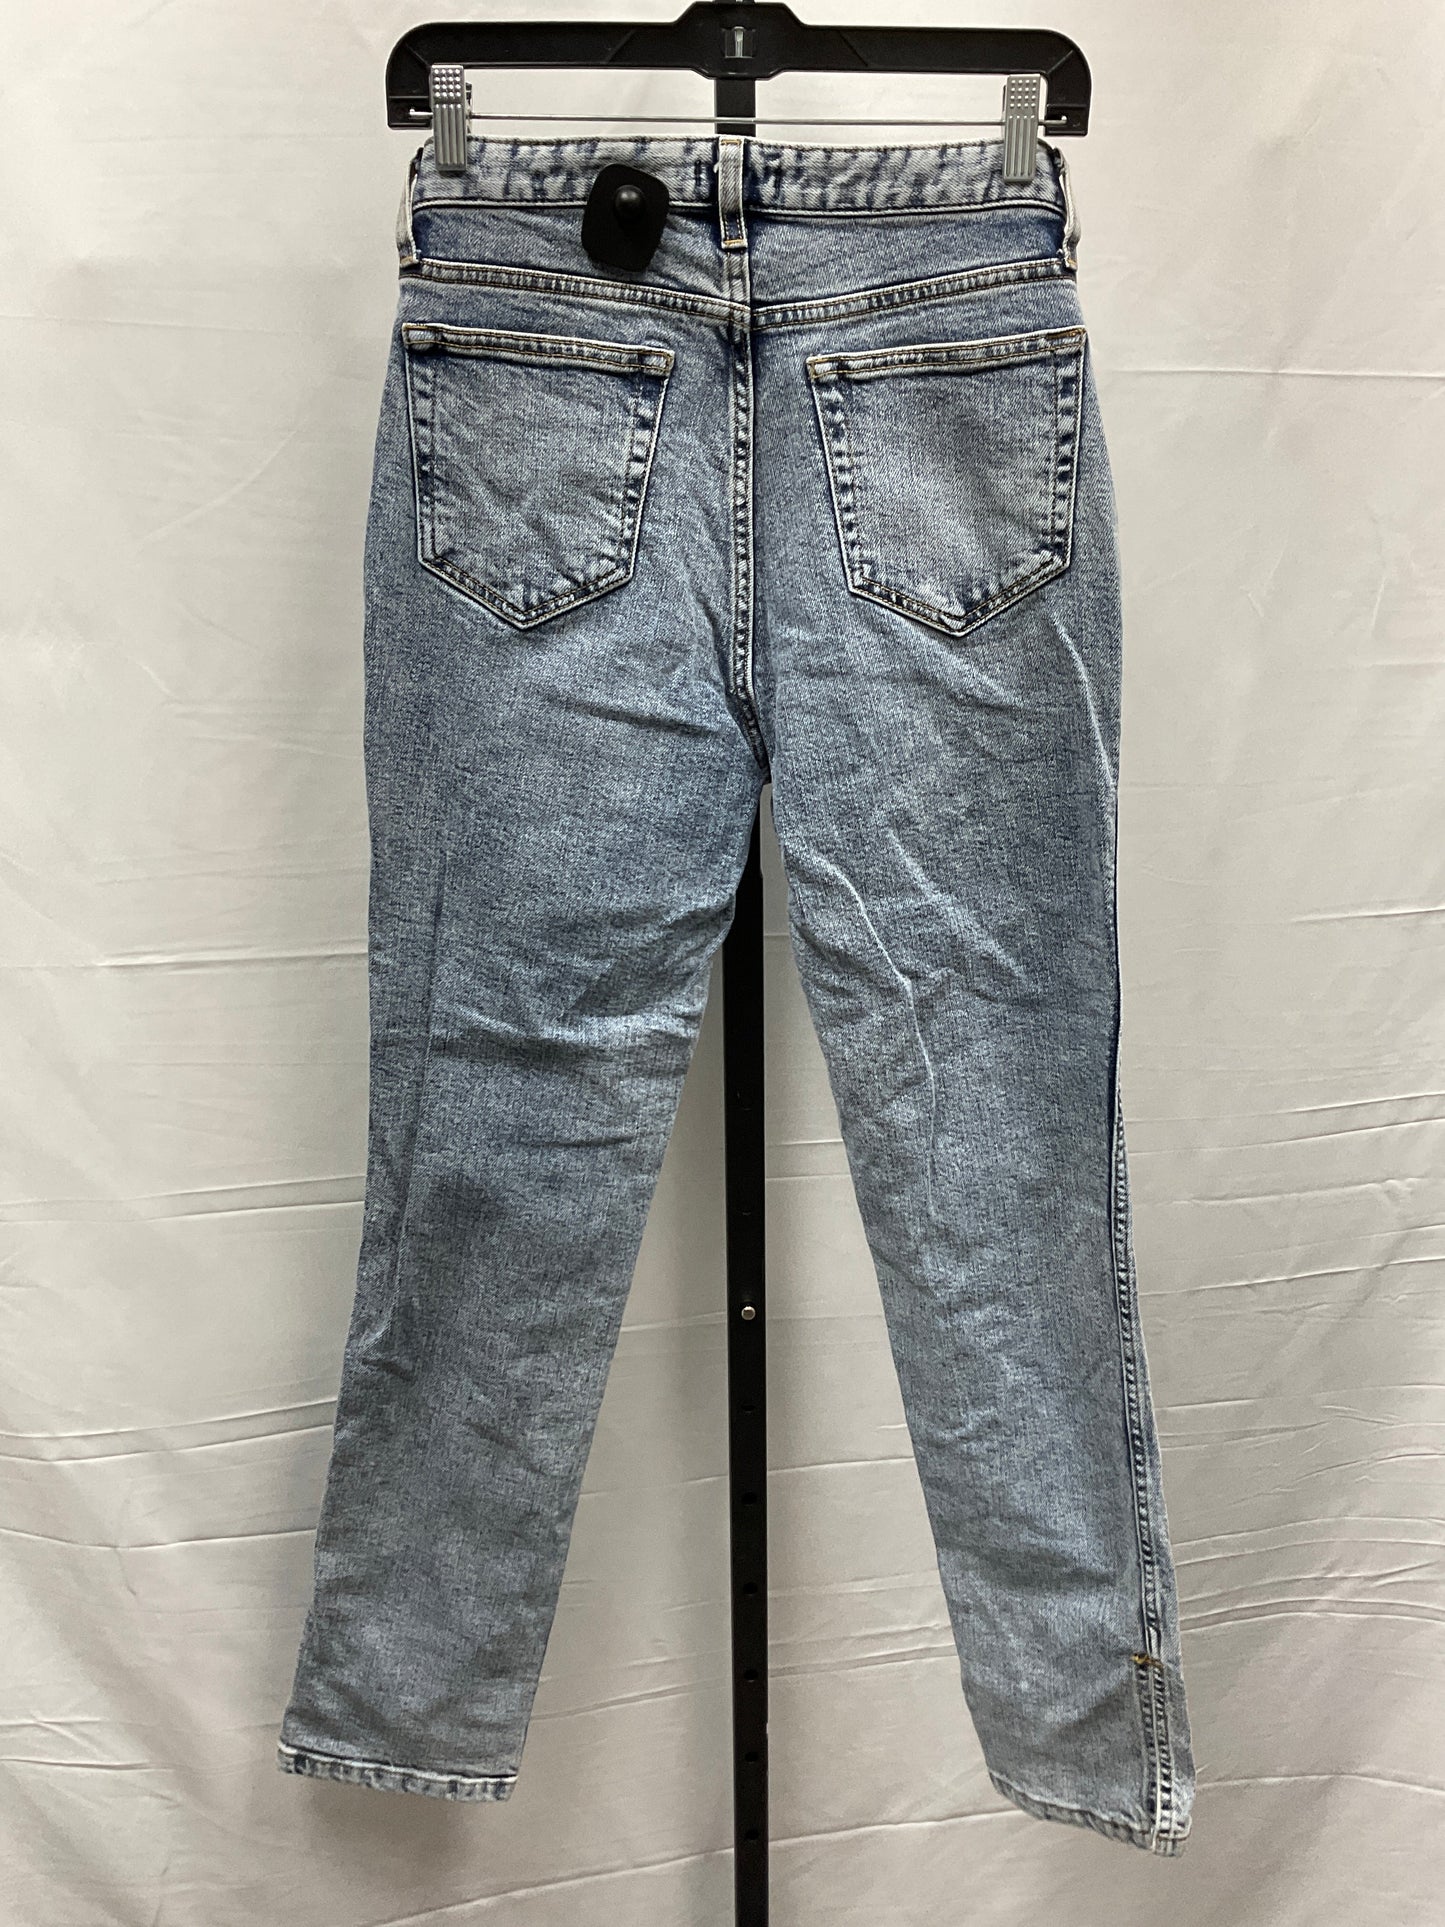 Jeans Straight By Gianni Bini  Size: 2